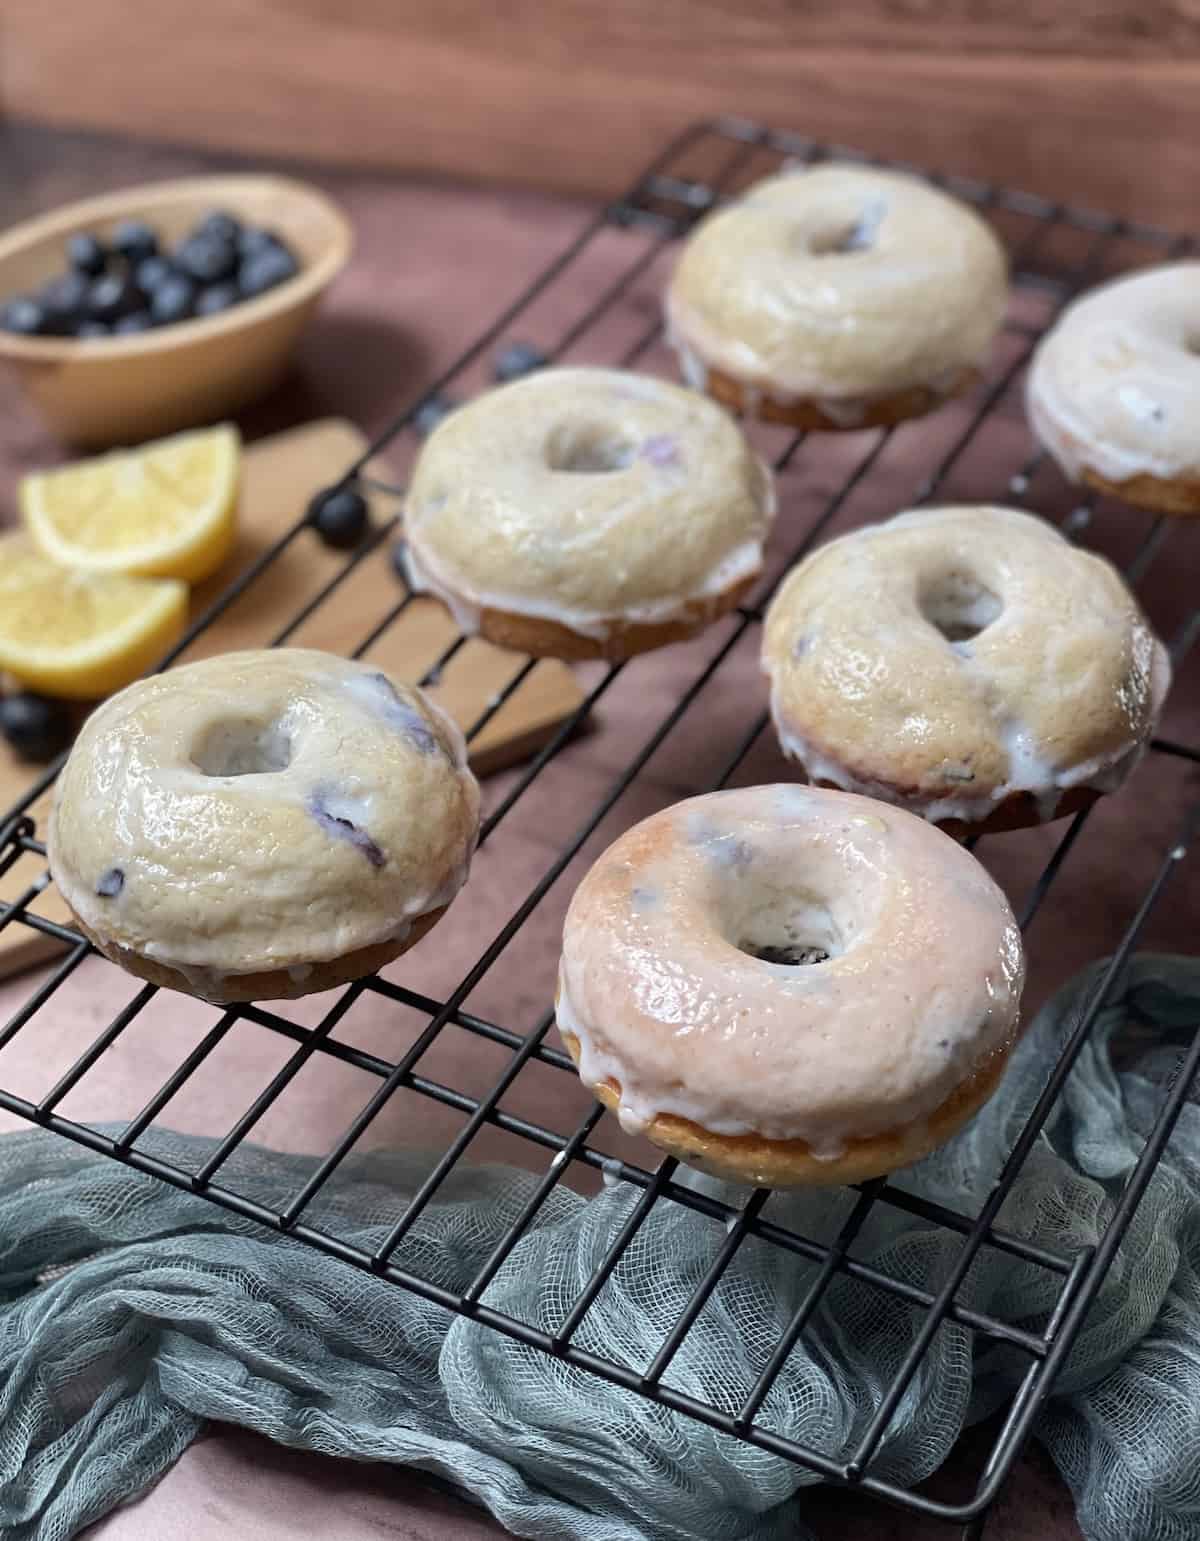 Iced baked blueberry cake donuts on a wire rack with lemons and blueberries on the side.